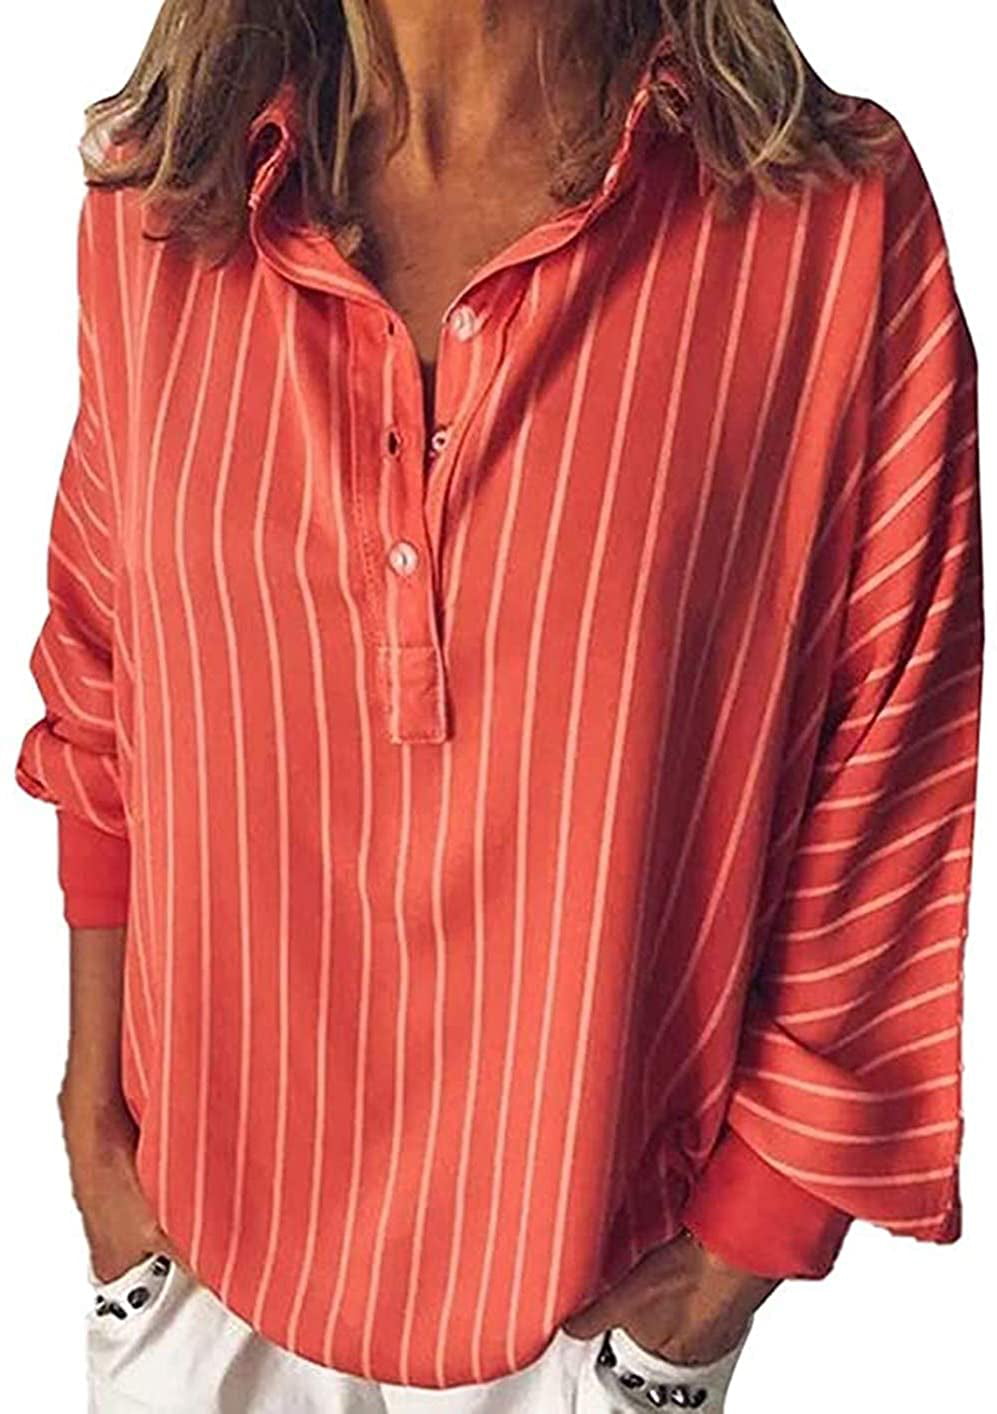 Women T Shirts Stripes,Womens Long Sleeve Button-Up Casual Loose Blouse Tops Office Tunic Shirts for Work